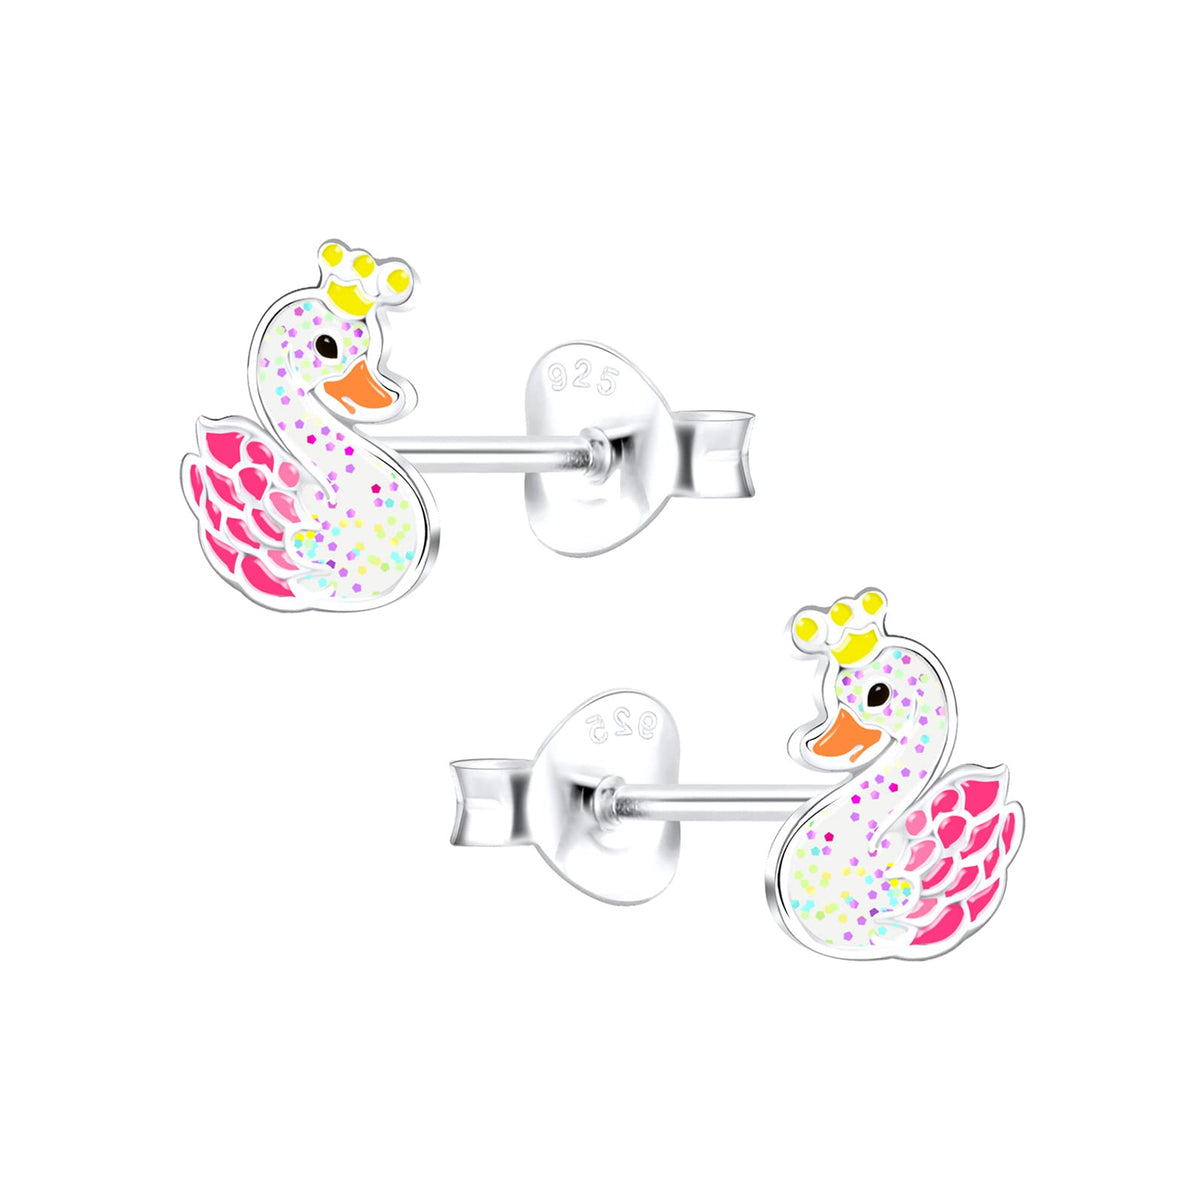 Raajsi by Yellow Chimes 925 Sterling Silver Stud Earring for Girls & Kids Melbees Kids Collection Swan Designed | Birthday Gift for Girls Kids | With Certificate of Authenticity & 6 Month Warranty